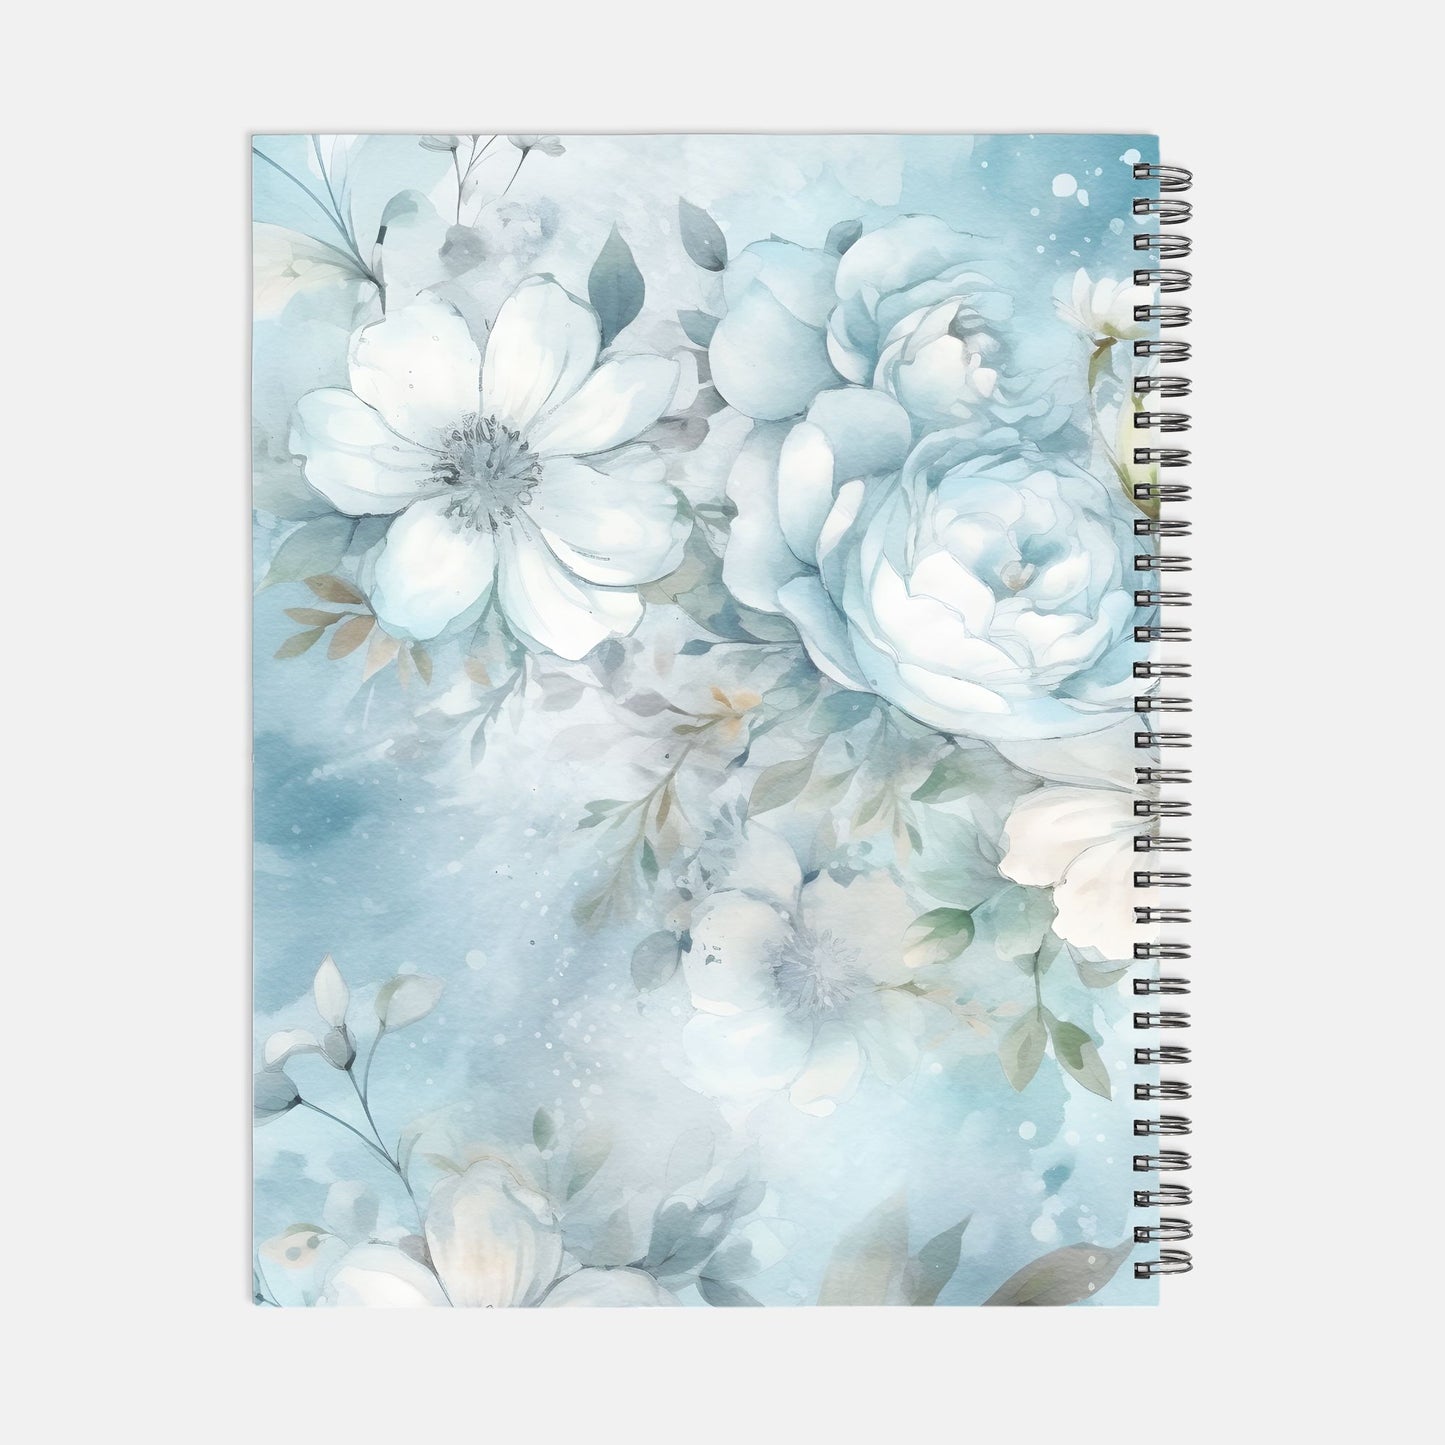 Notebook Softcover Spiral 8.5 x 11 - Boss Lady Classy 03